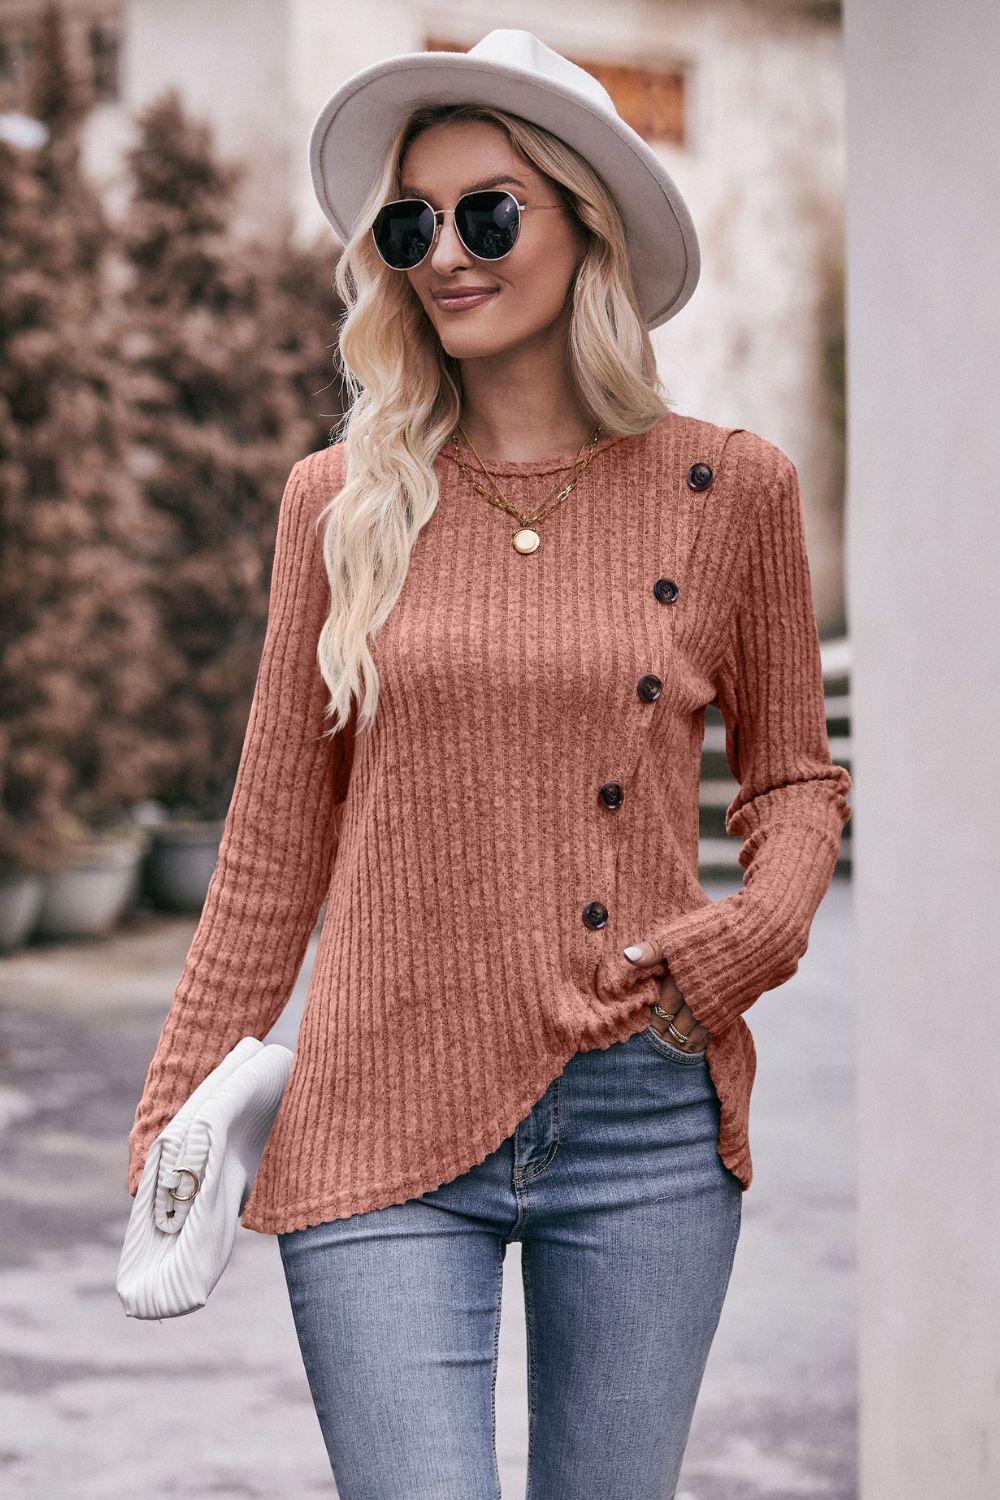 Double Take Ribbed Round Neck Buttoned Long Sleeve Tee